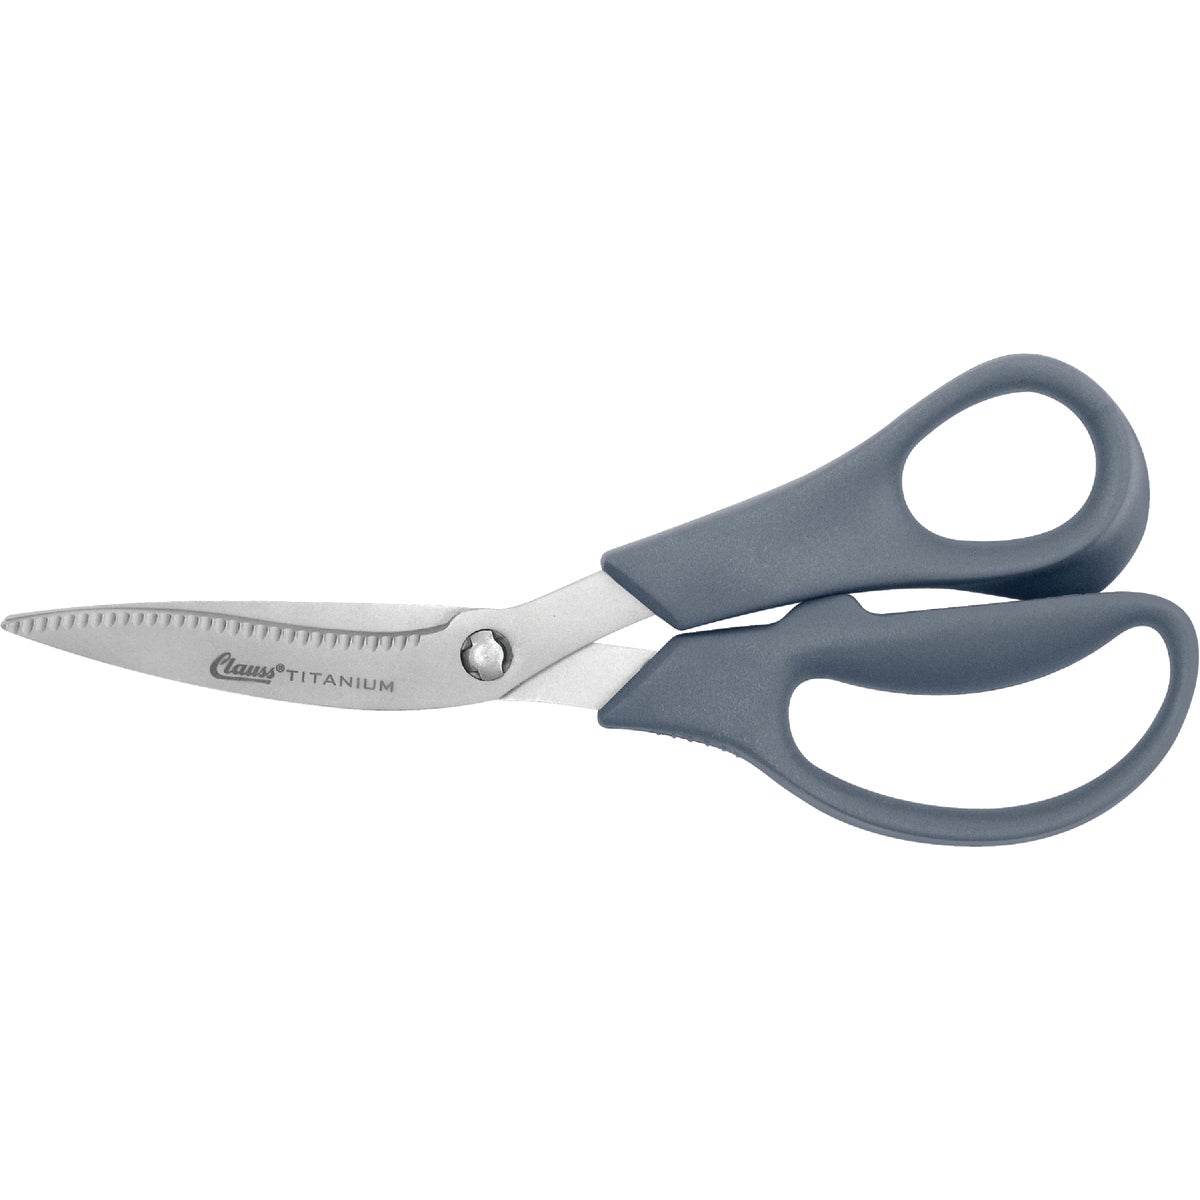 Item 627245, Contoured and serrated blade. Notched blade.